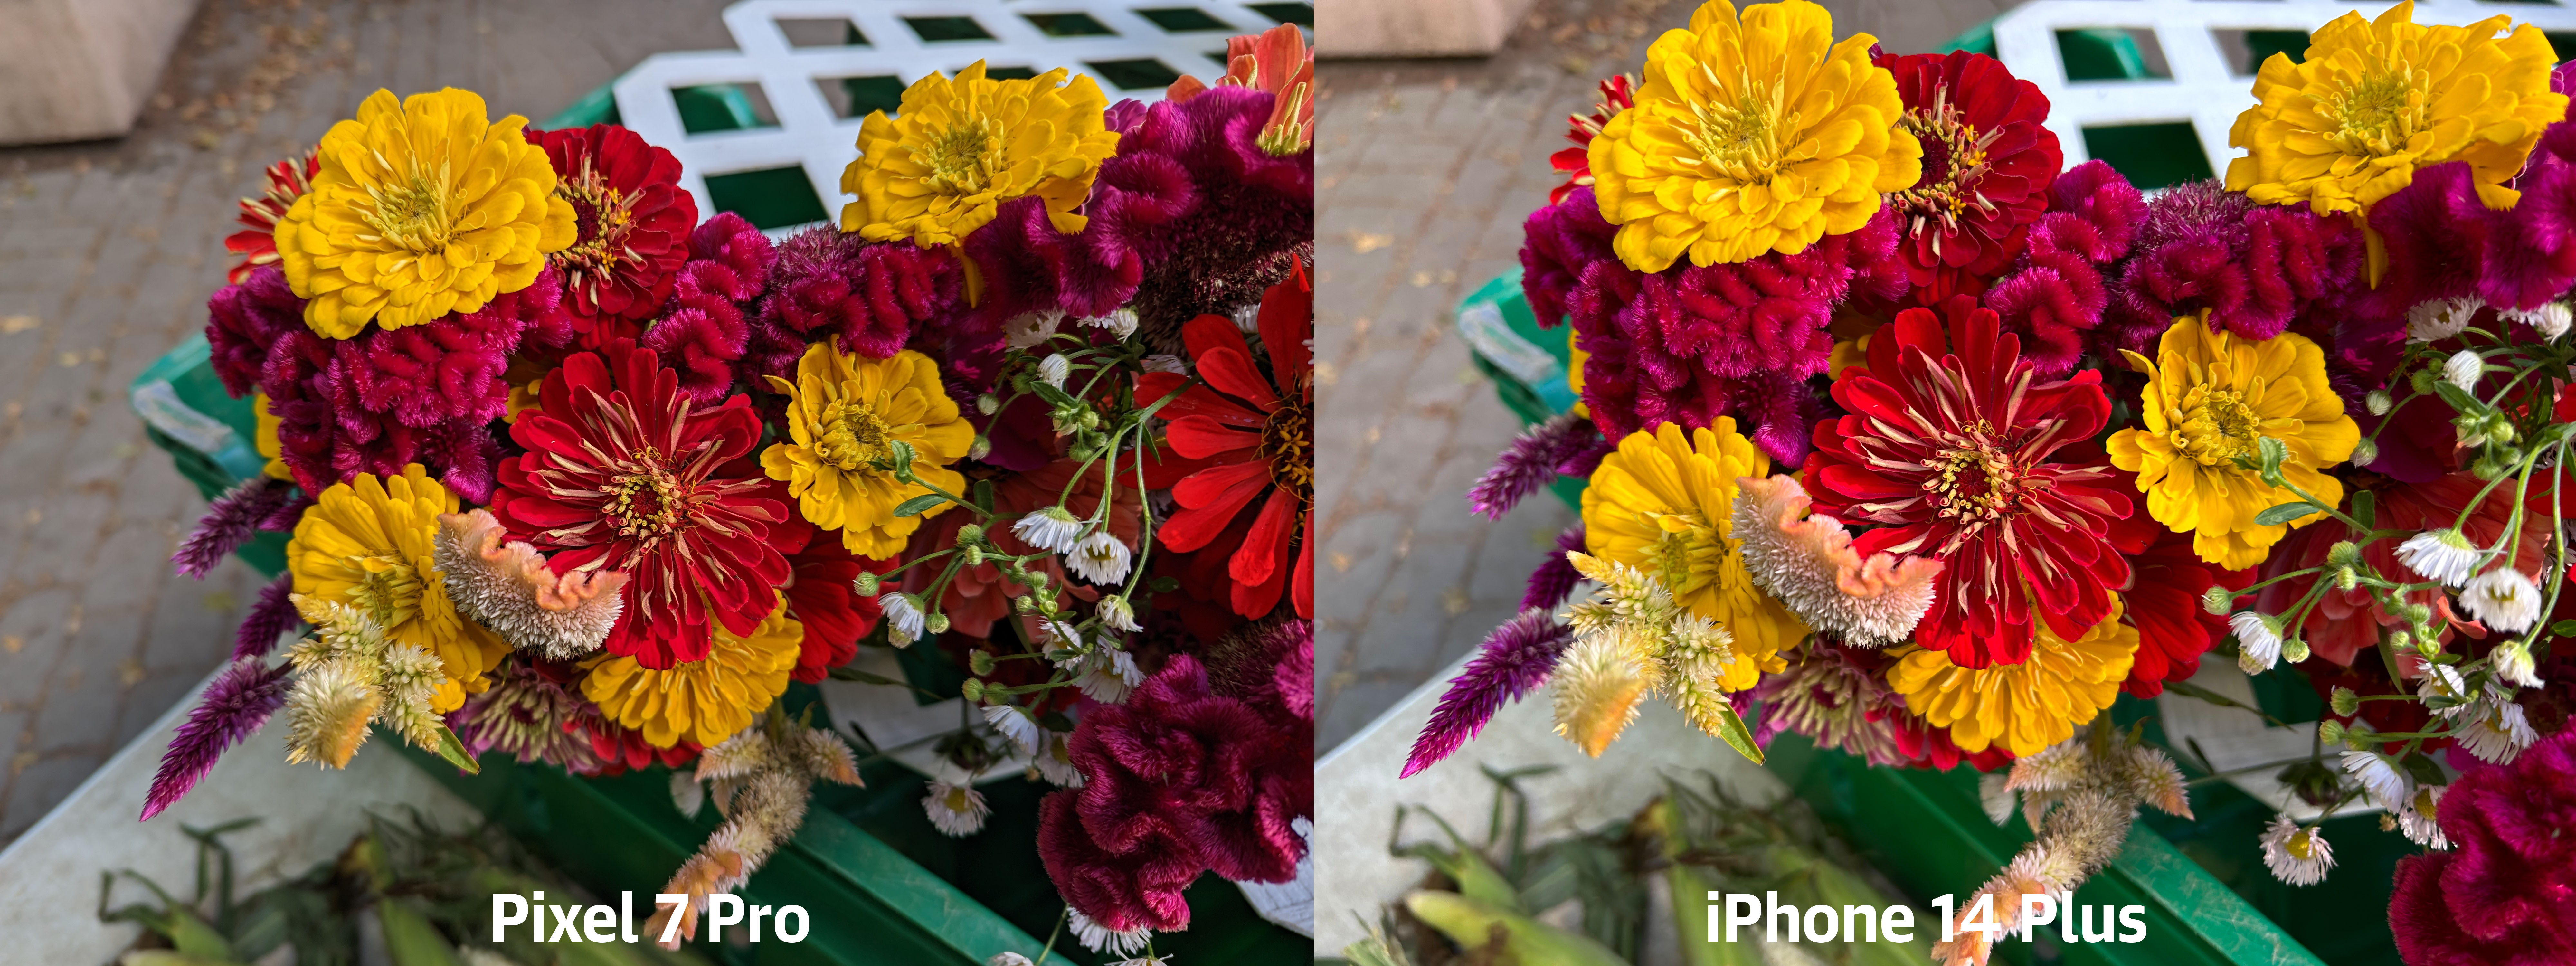 <p>Here are a selection of camera samples comparing the Pixel 7 Pro to the iPhone 14 Plus and Galaxy S22 Ultra</p>
